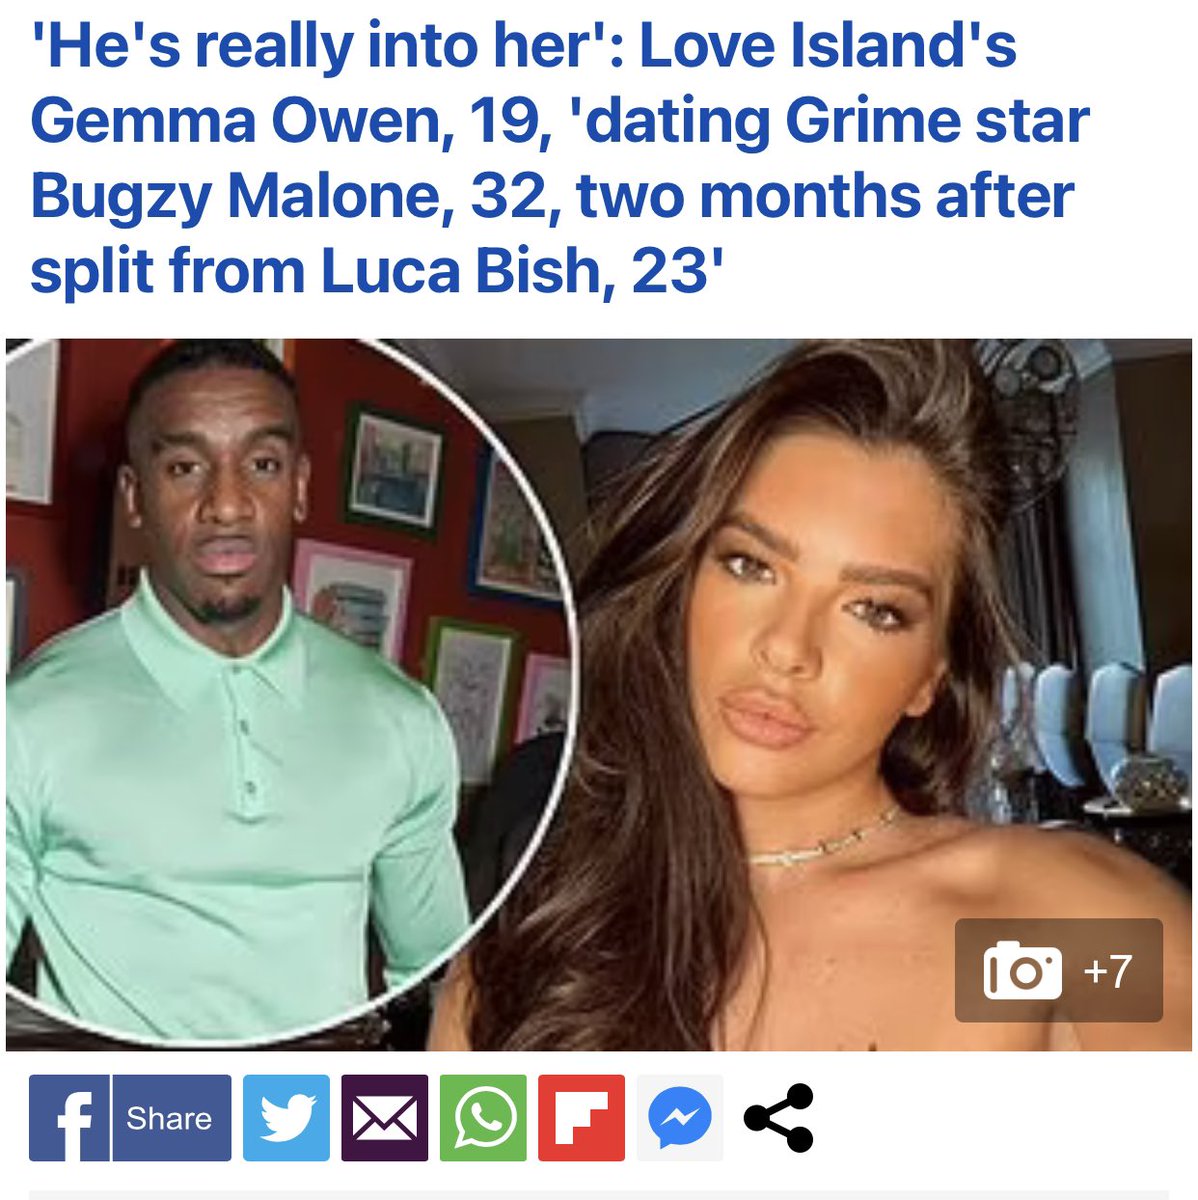 LOOOOOL what have I just read? Bugzy Malone and Gemma? I know Michael Owen is tearing his house down as we speak 😭